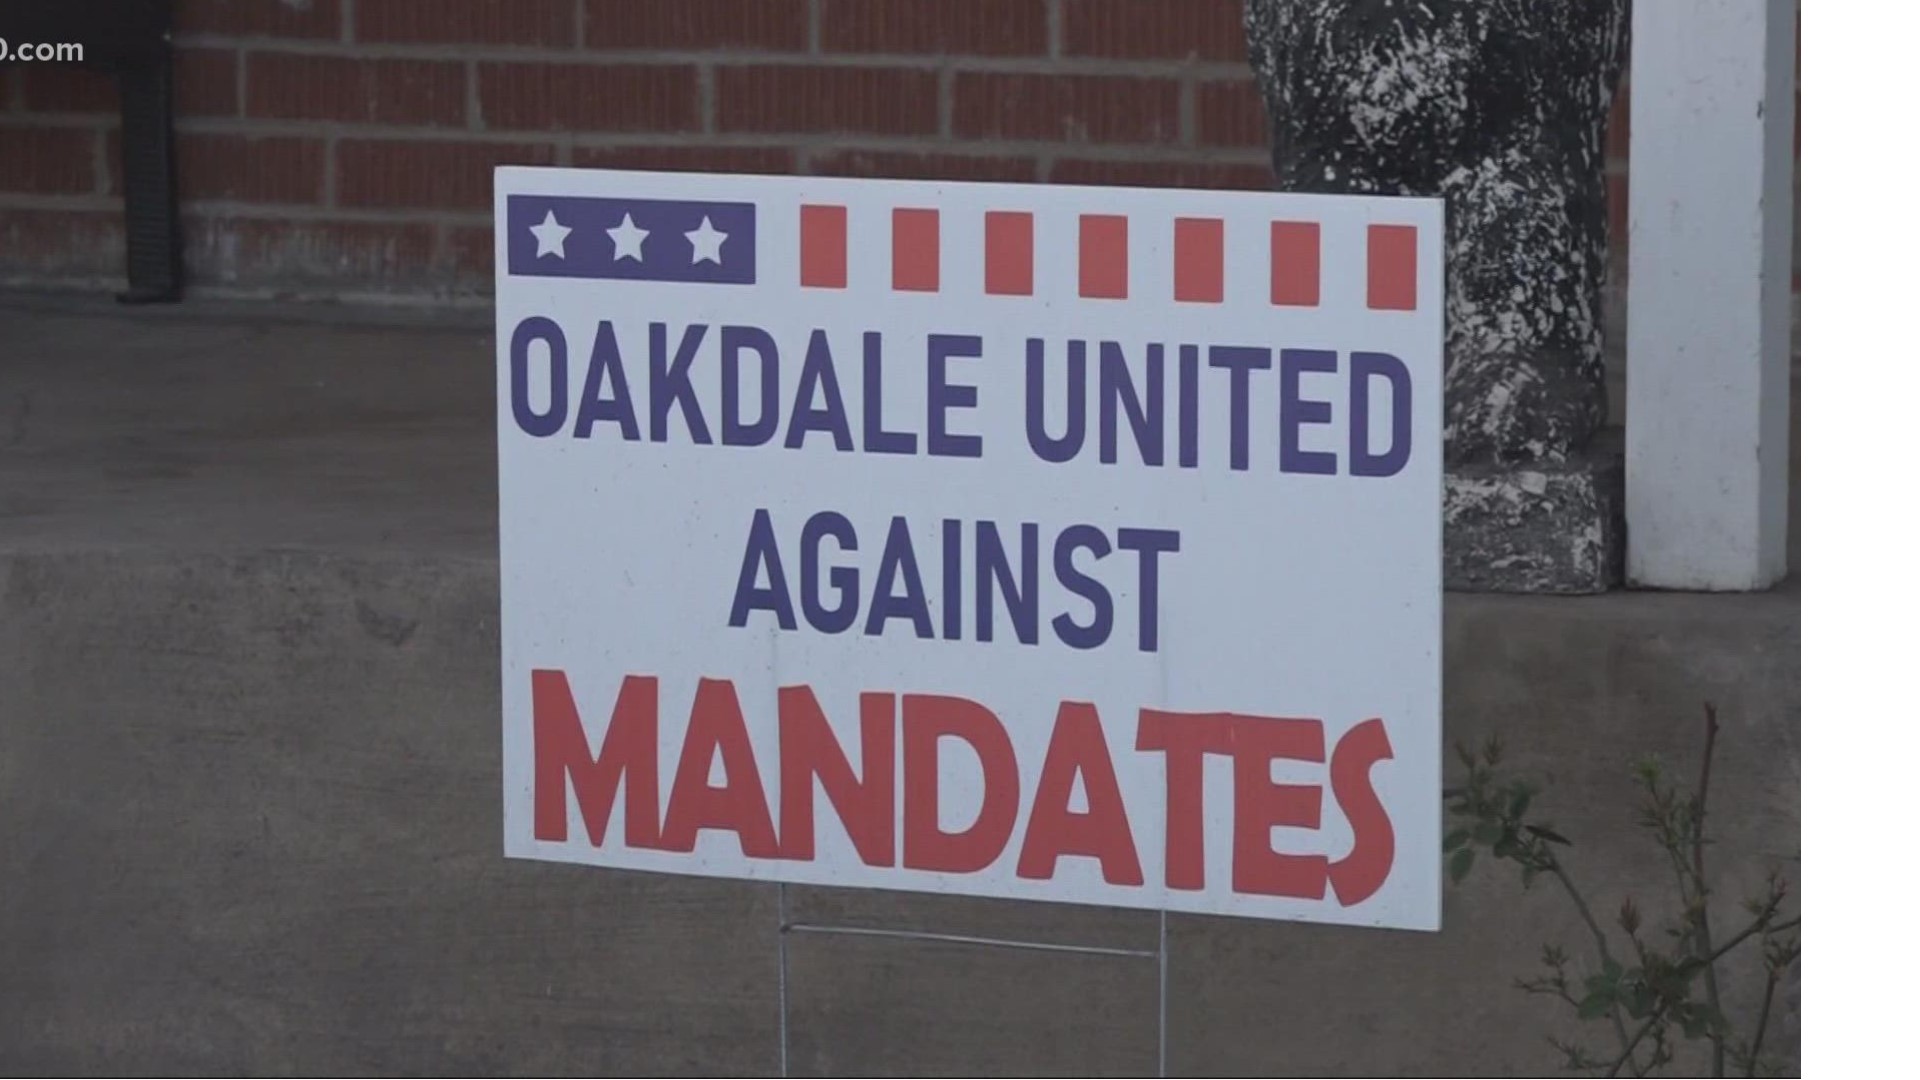 ABC10's Kurt Rivera spent the day in Oakdale to cover the fight over mask mandates.